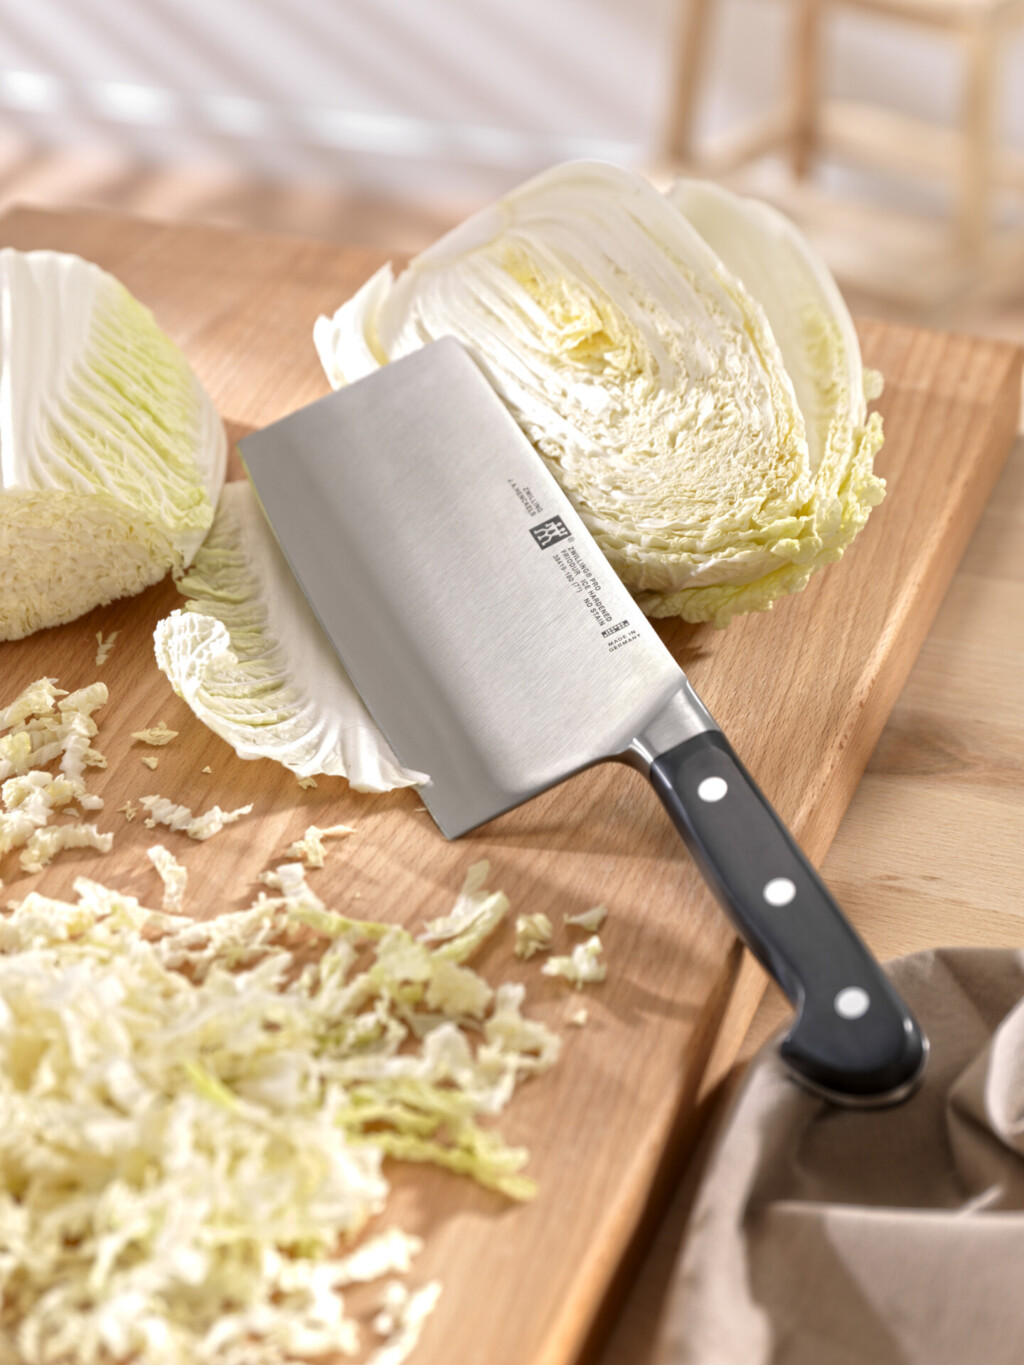 Dao Chef Ban To Zwilling Gourmet 36112 181 0